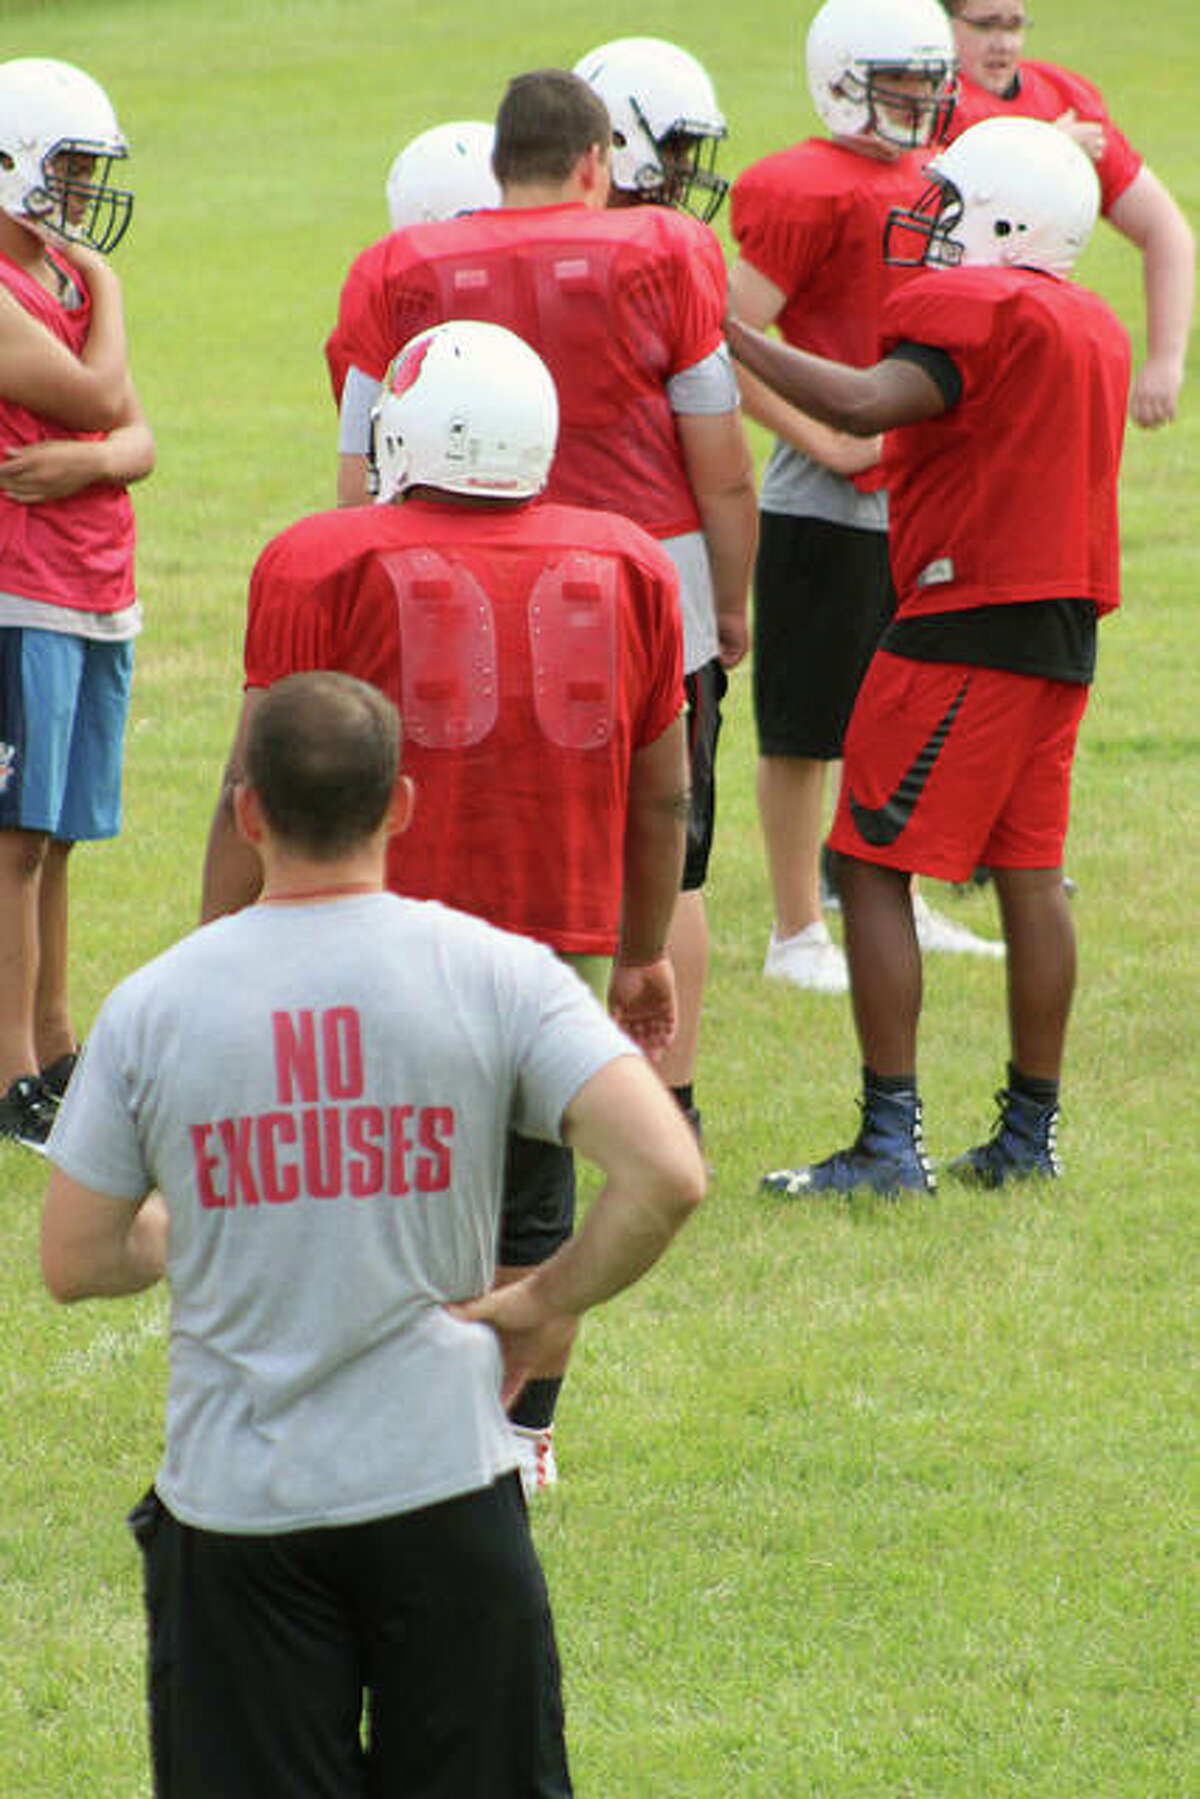 Alton High head coach Eric Dickerson, foreground, watches the line practice while his shirt sports a subliminal message during a summer contact session Tuesday at AHS.